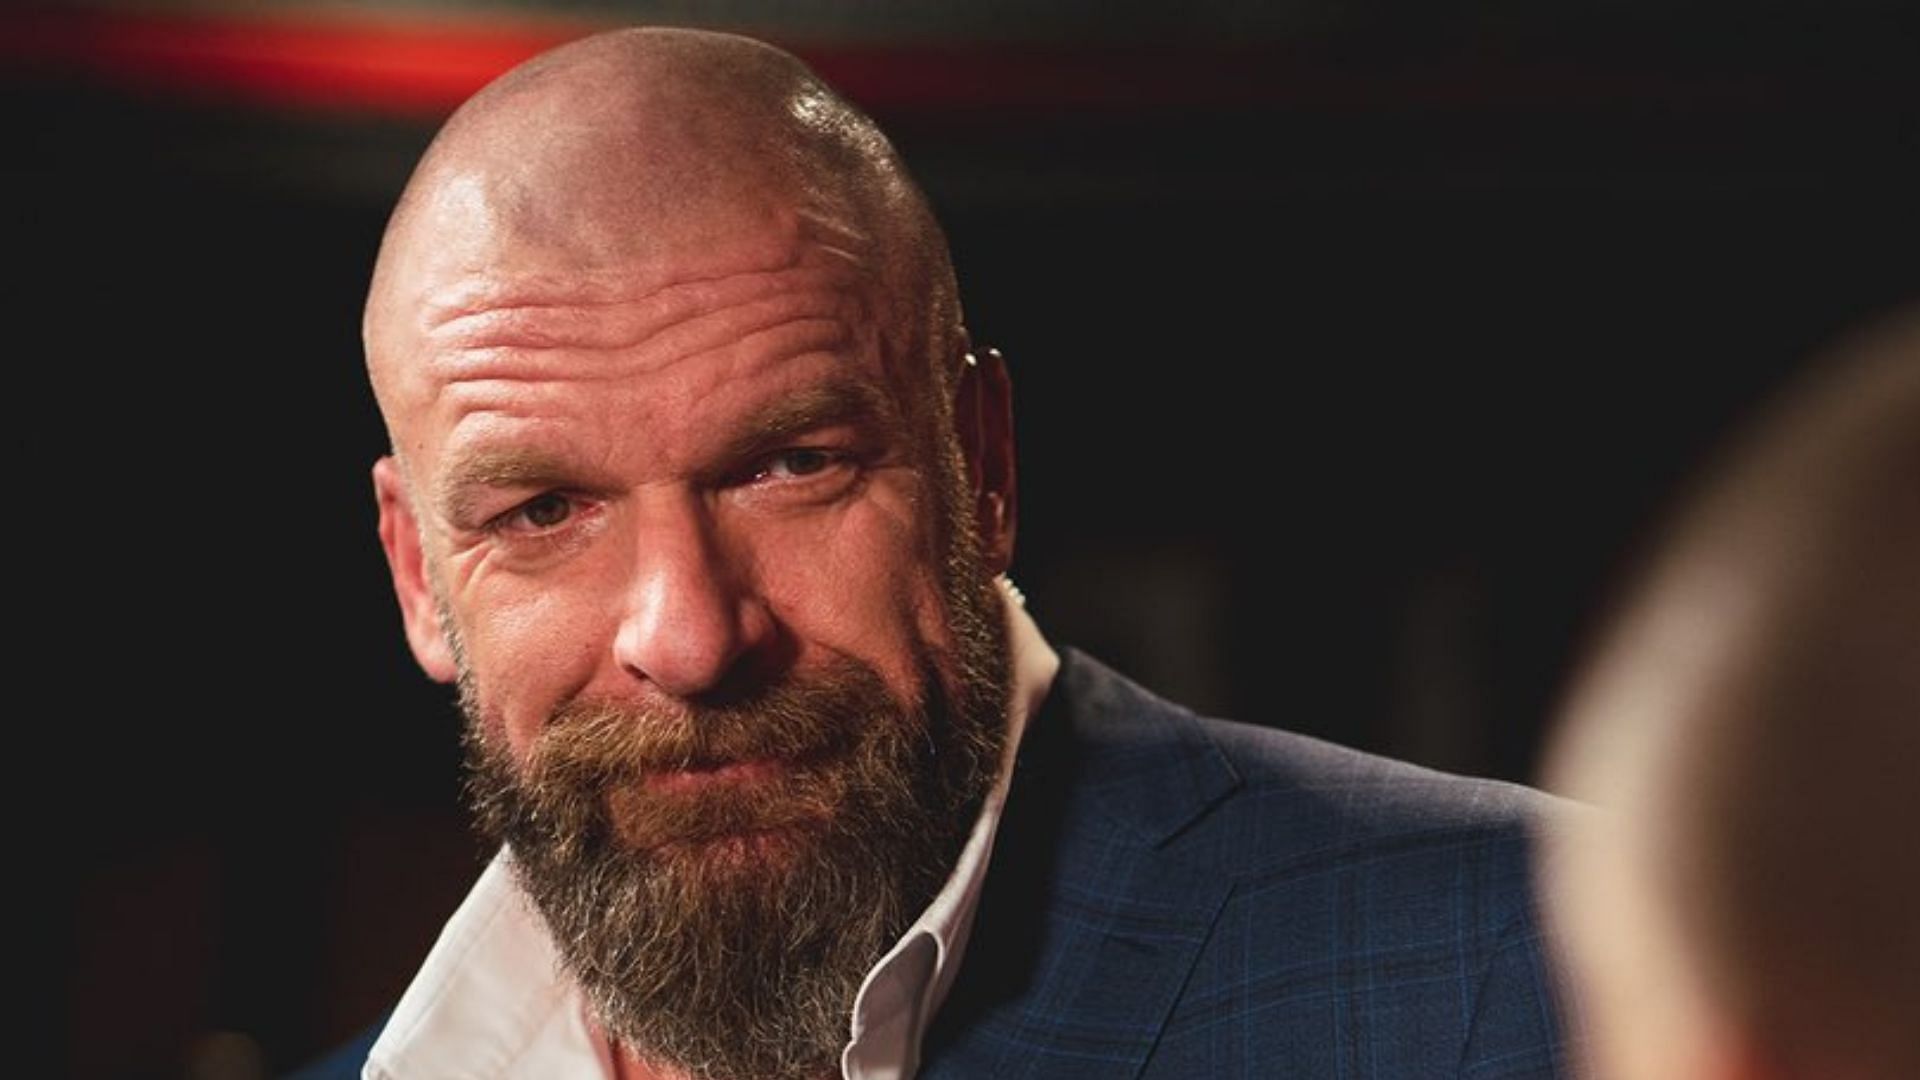 Triple H is the Chief Content Officer of WWE!